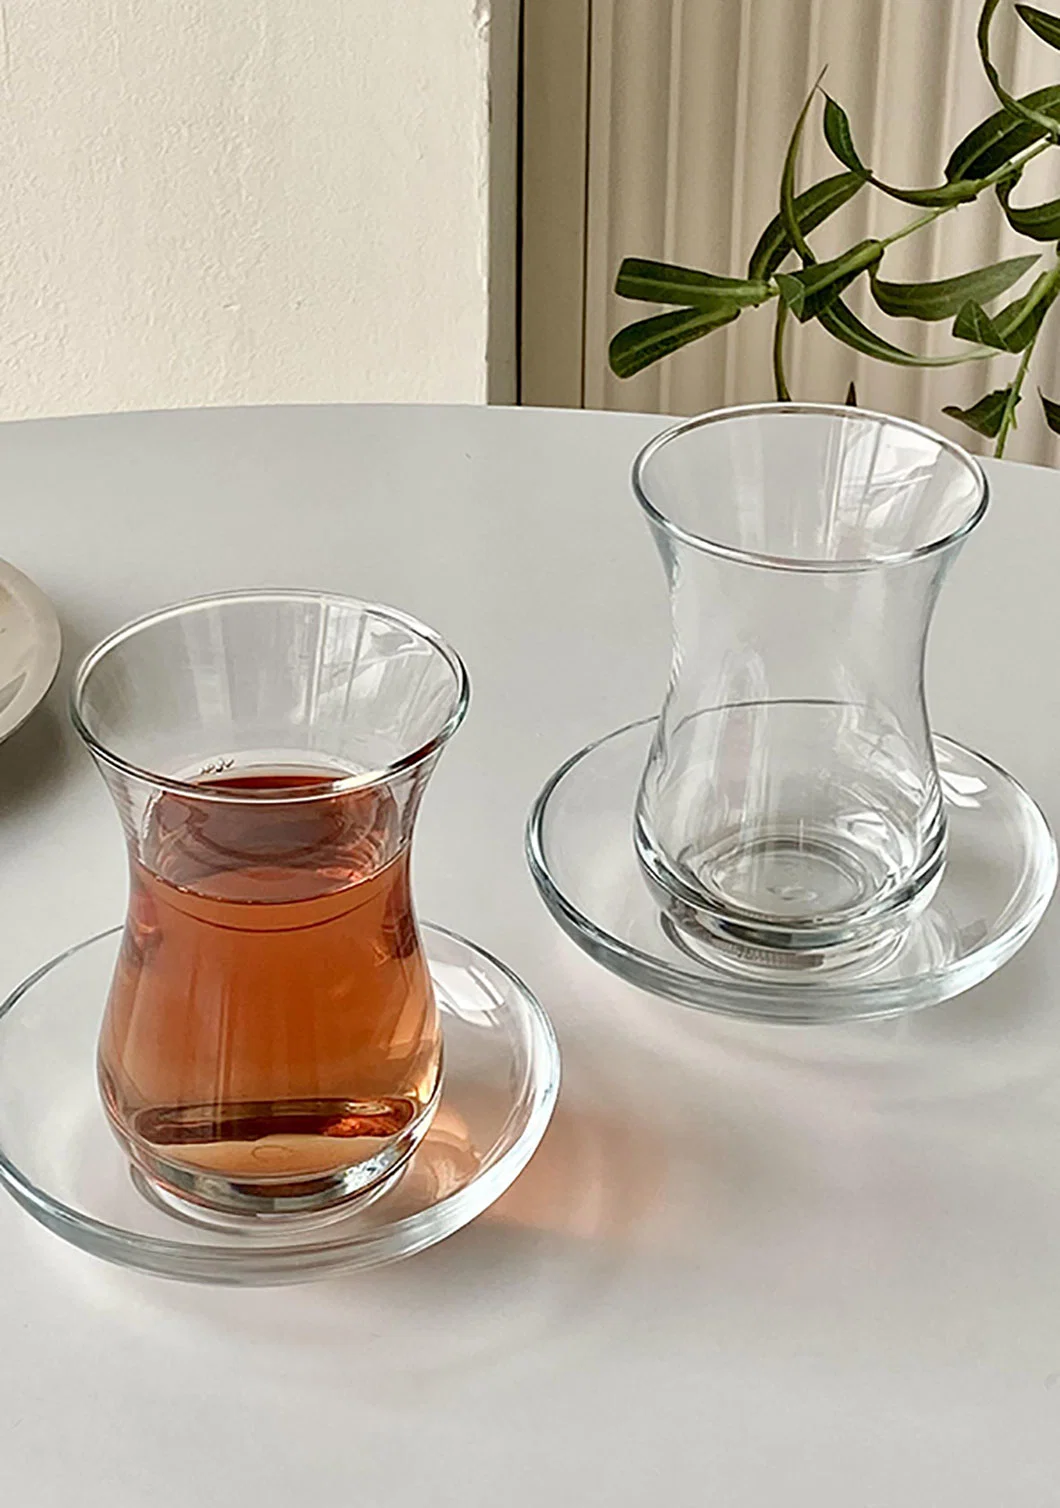 Turkish Red Tea Cup Heat-Resistant Glass with Dish European Afternoon Tea Snack Dish Coffee Extract Flower Tea Small Cup